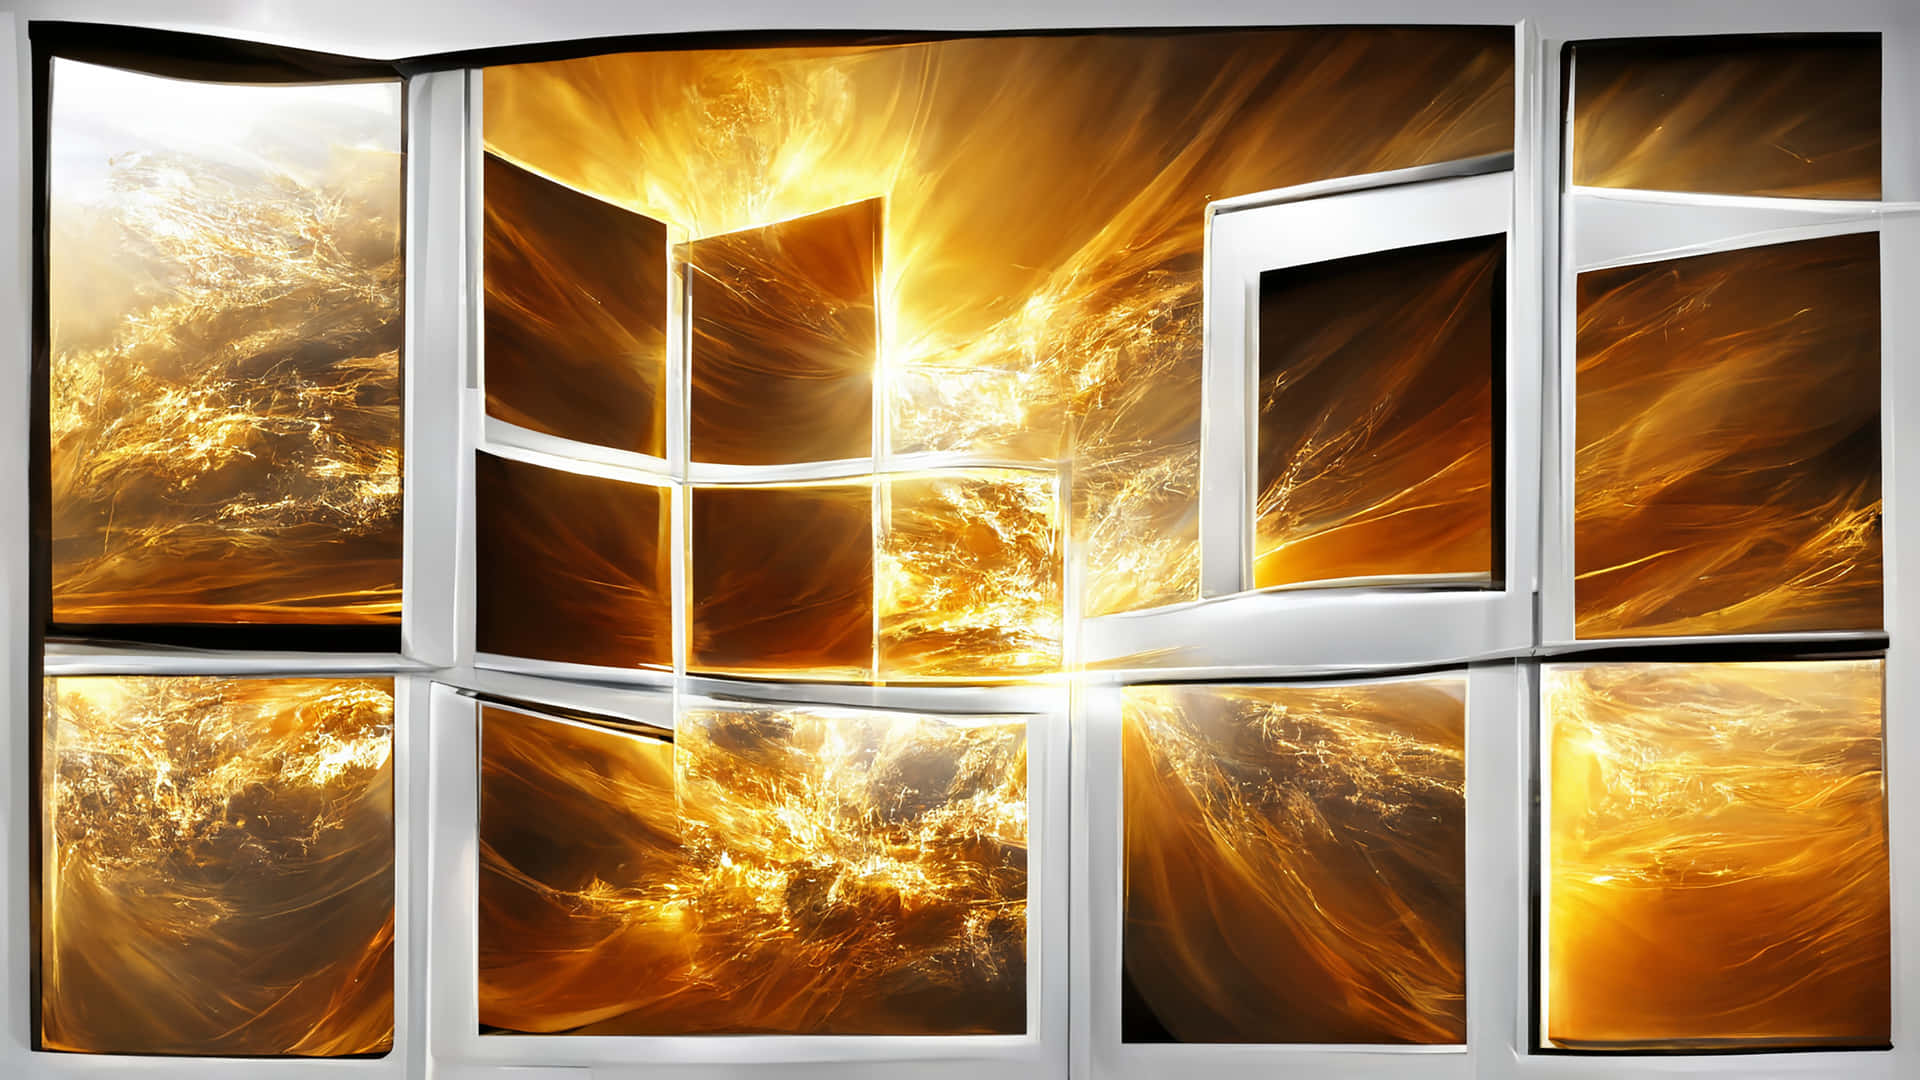 Abstract Windows12 Energy Explosion Wallpaper